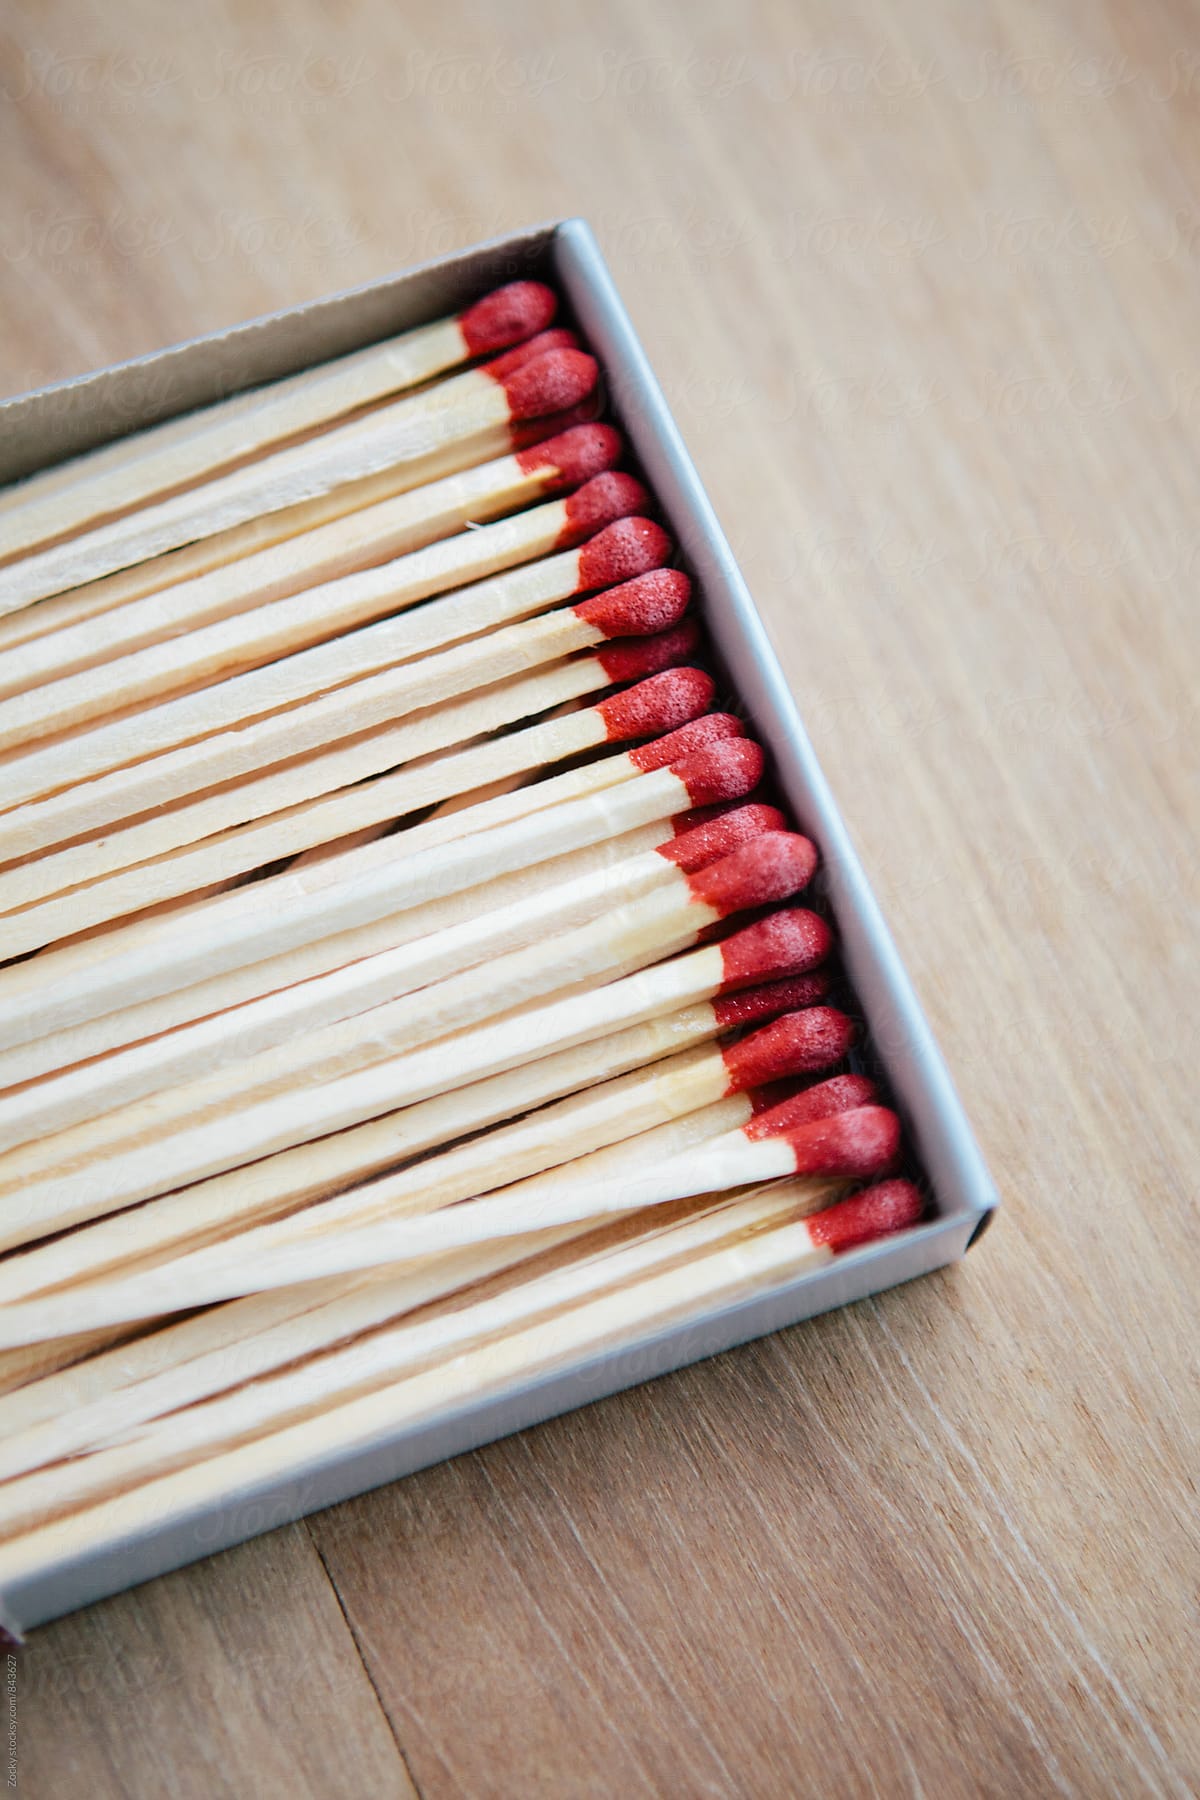 Matchstick in paper box